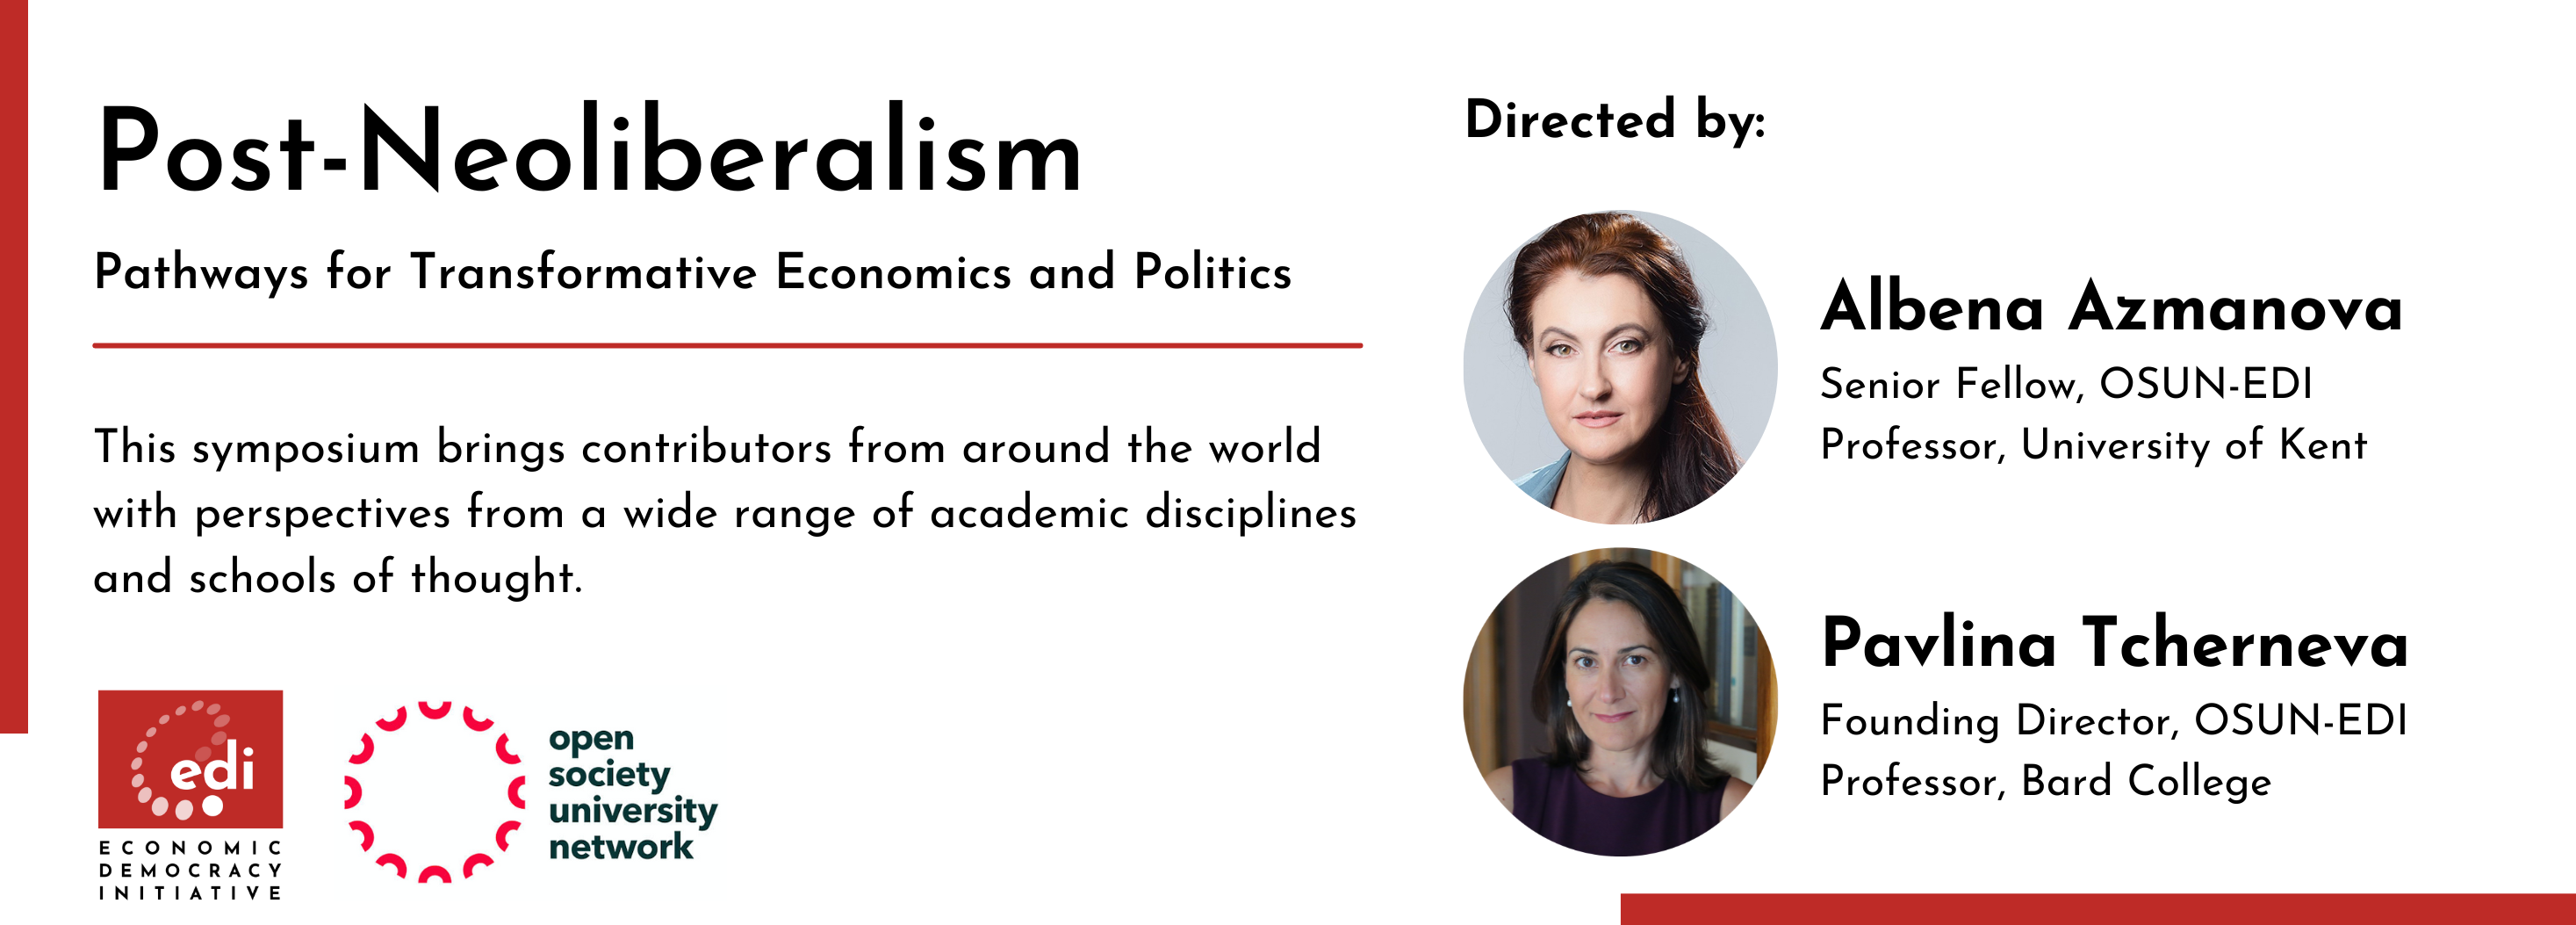 Post-Neoliberalism - Pathways for Transformative Economics and Politics

This symposium brings contributors from around the world with perspectives from a wide range of academic disciplines and schools of thought.

Directed by Albena Azmanova, EDI Sen